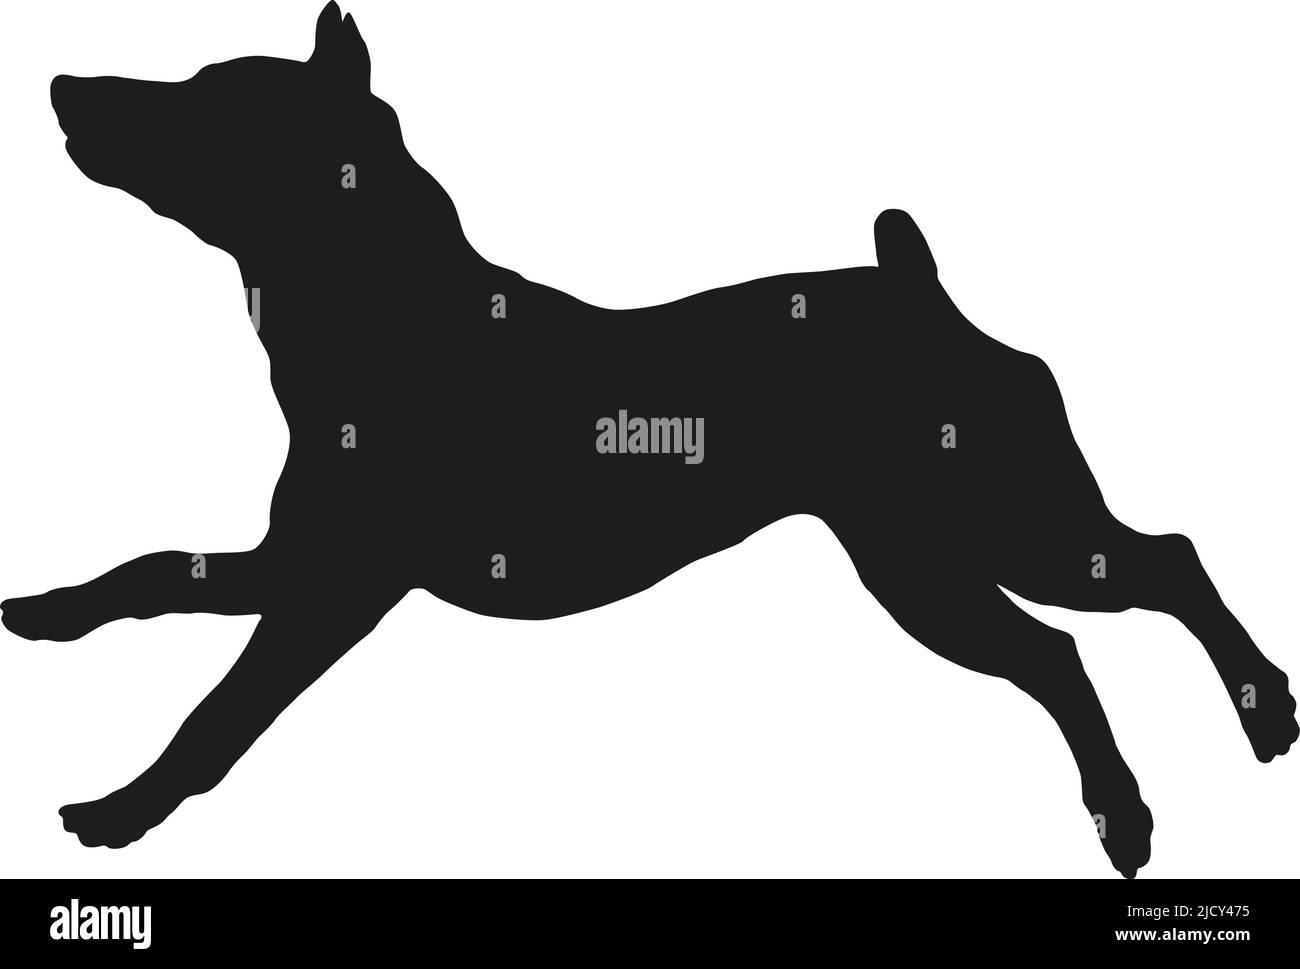 Black dog silhouette. Running and jumping zwergpinscher puppy. Miniature pinscher or king of the toys. Pet animals. Isolated on a white background. Stock Vector